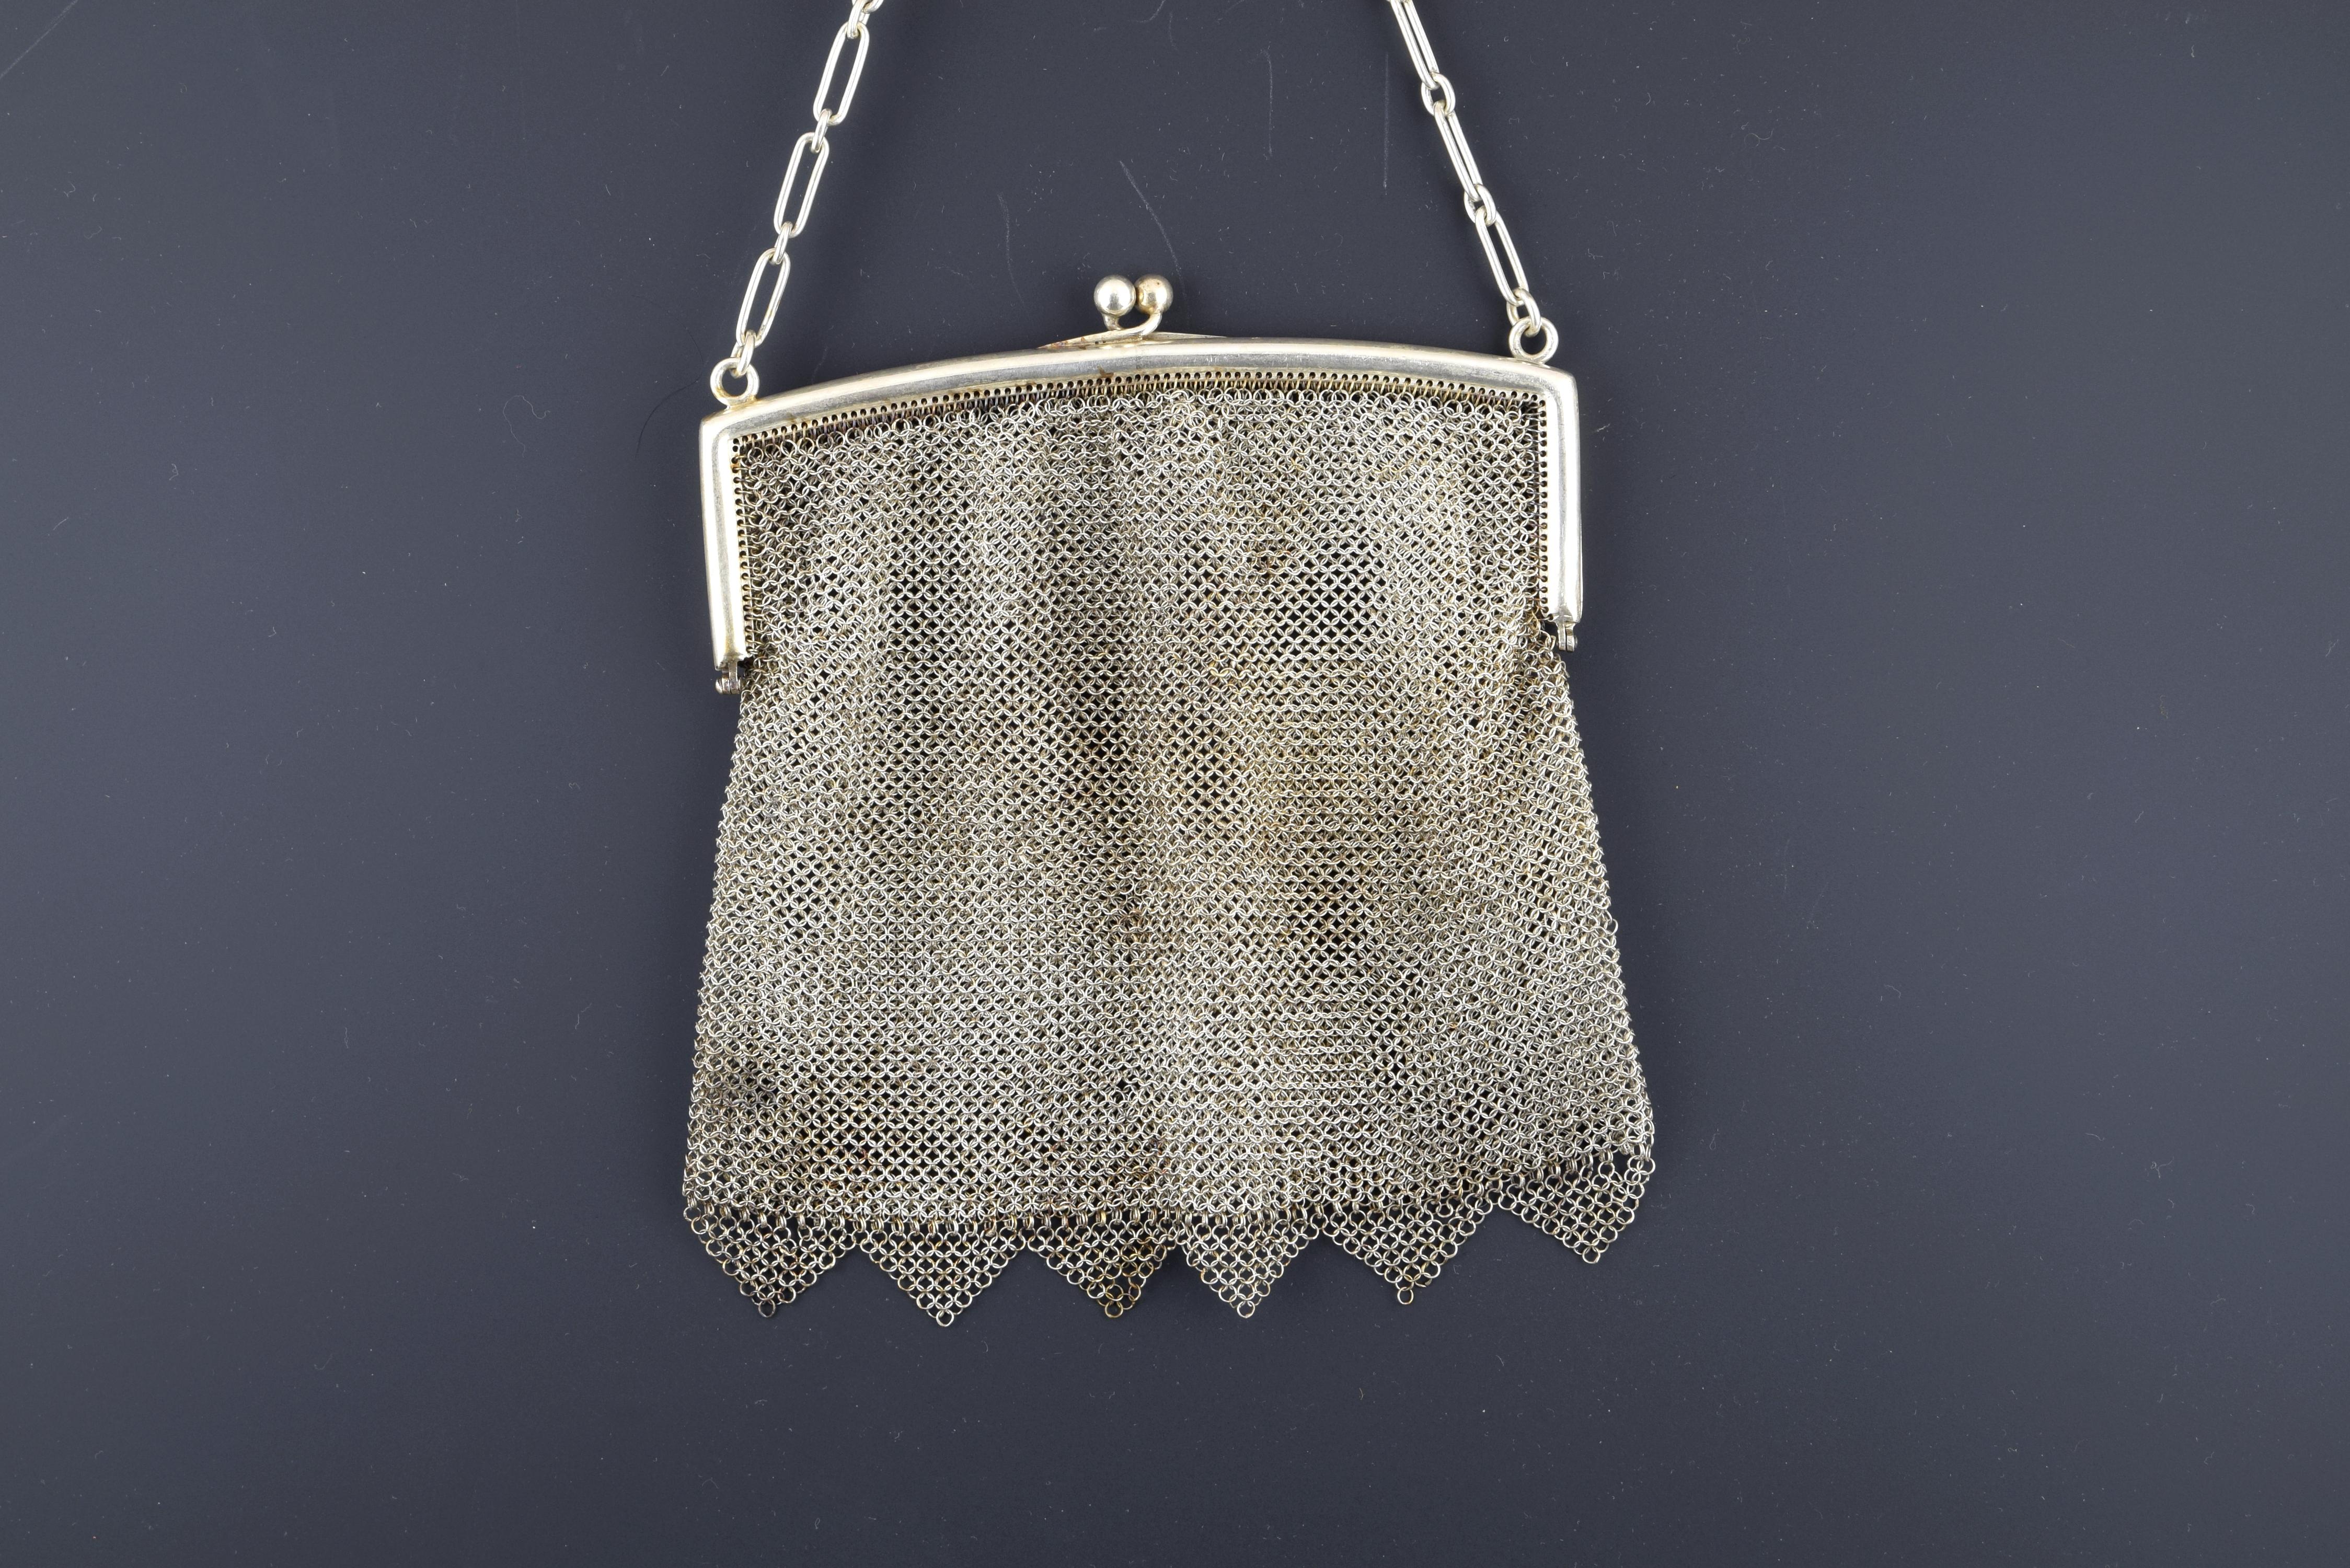 Silver mesh bag in its color decorated with triangular elements on the bottom that has a smooth closure by hinges and a chain of alternating long and short links. This type of pieces were very frequent in the 19th century, as a luxury element and a